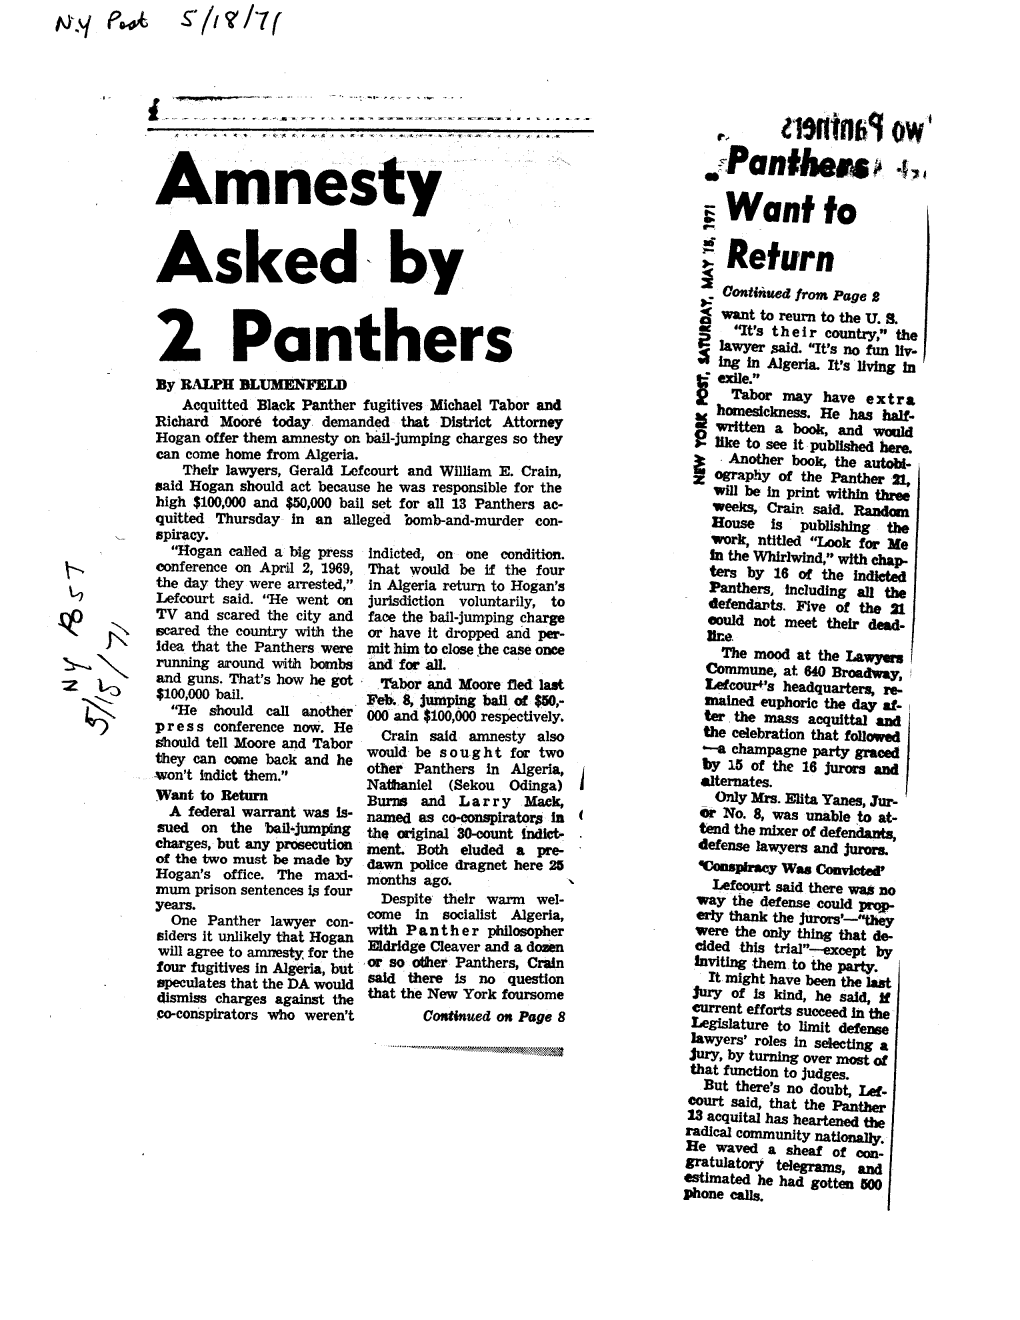 Amnesty Asked by 2 Panthers